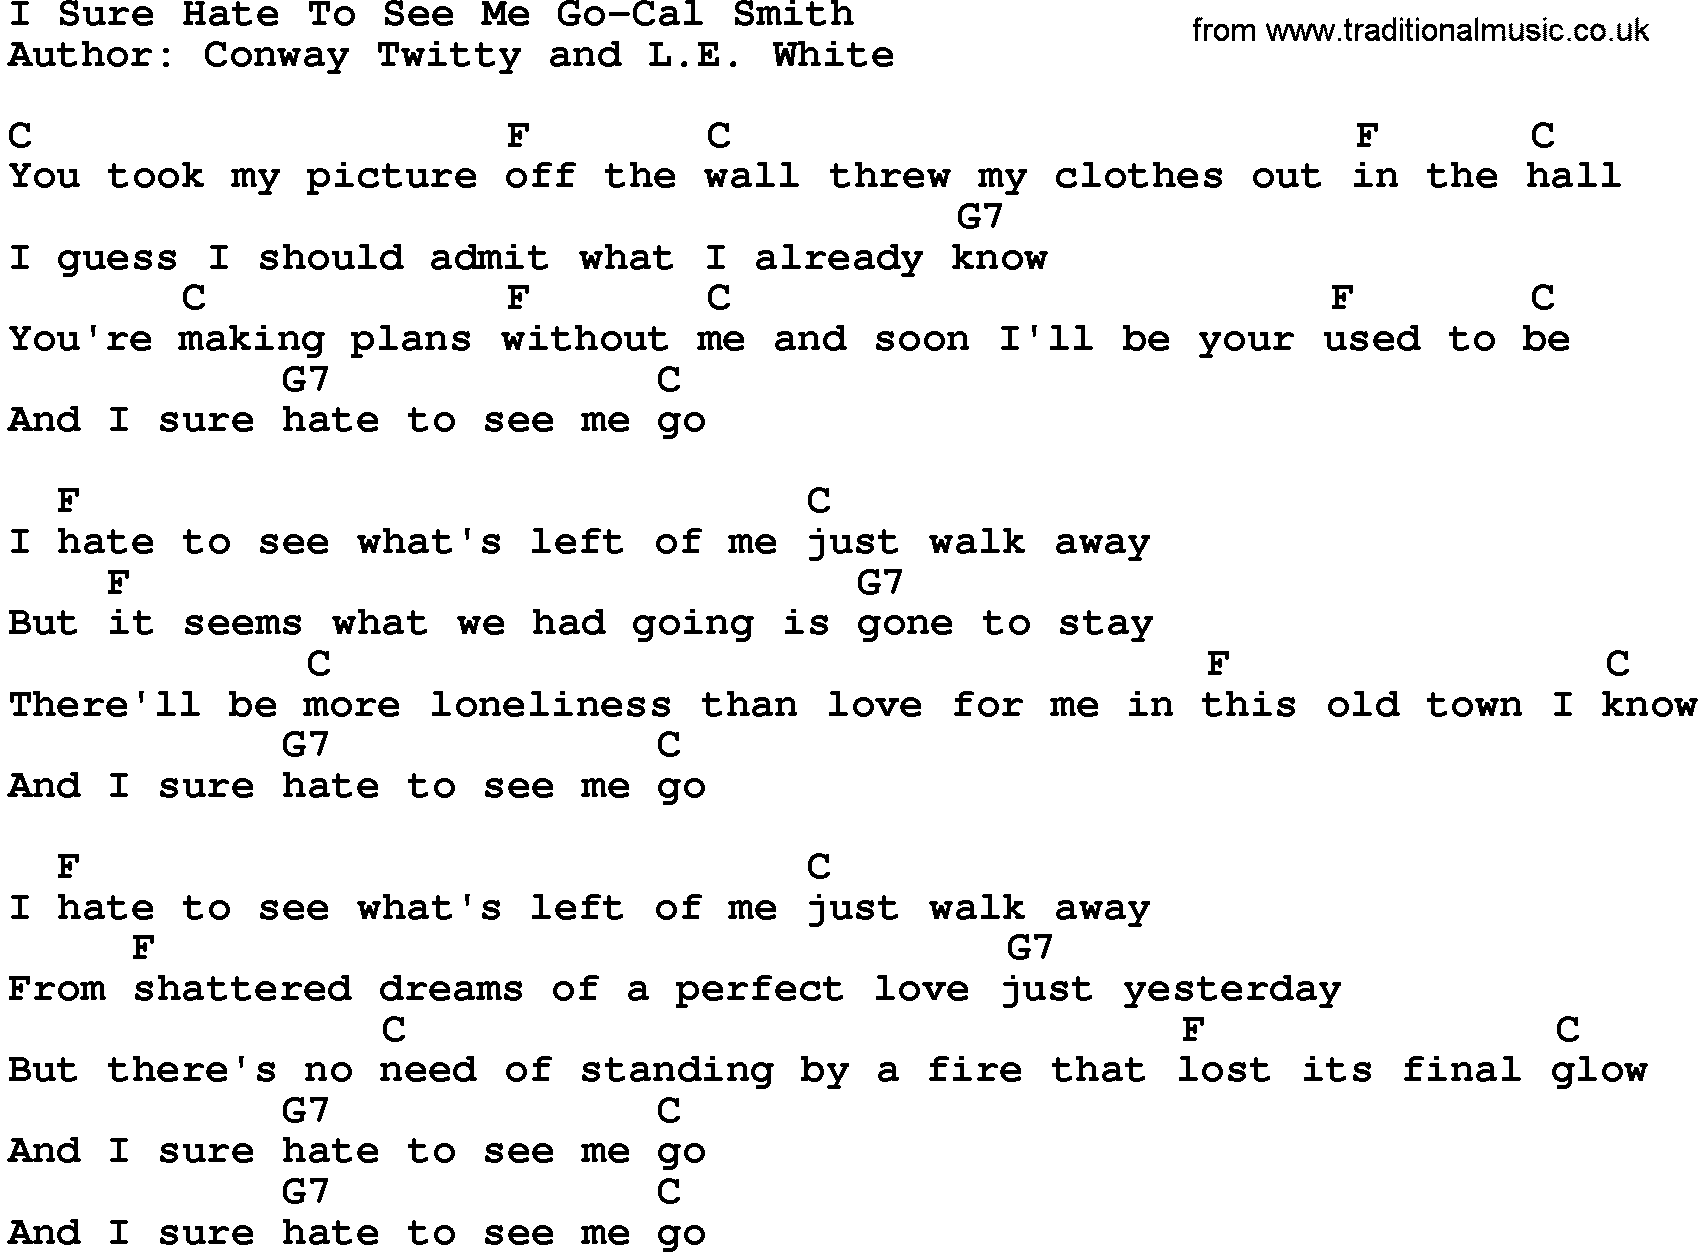 Country music song: I Sure Hate To See Me Go-Cal Smith lyrics and chords